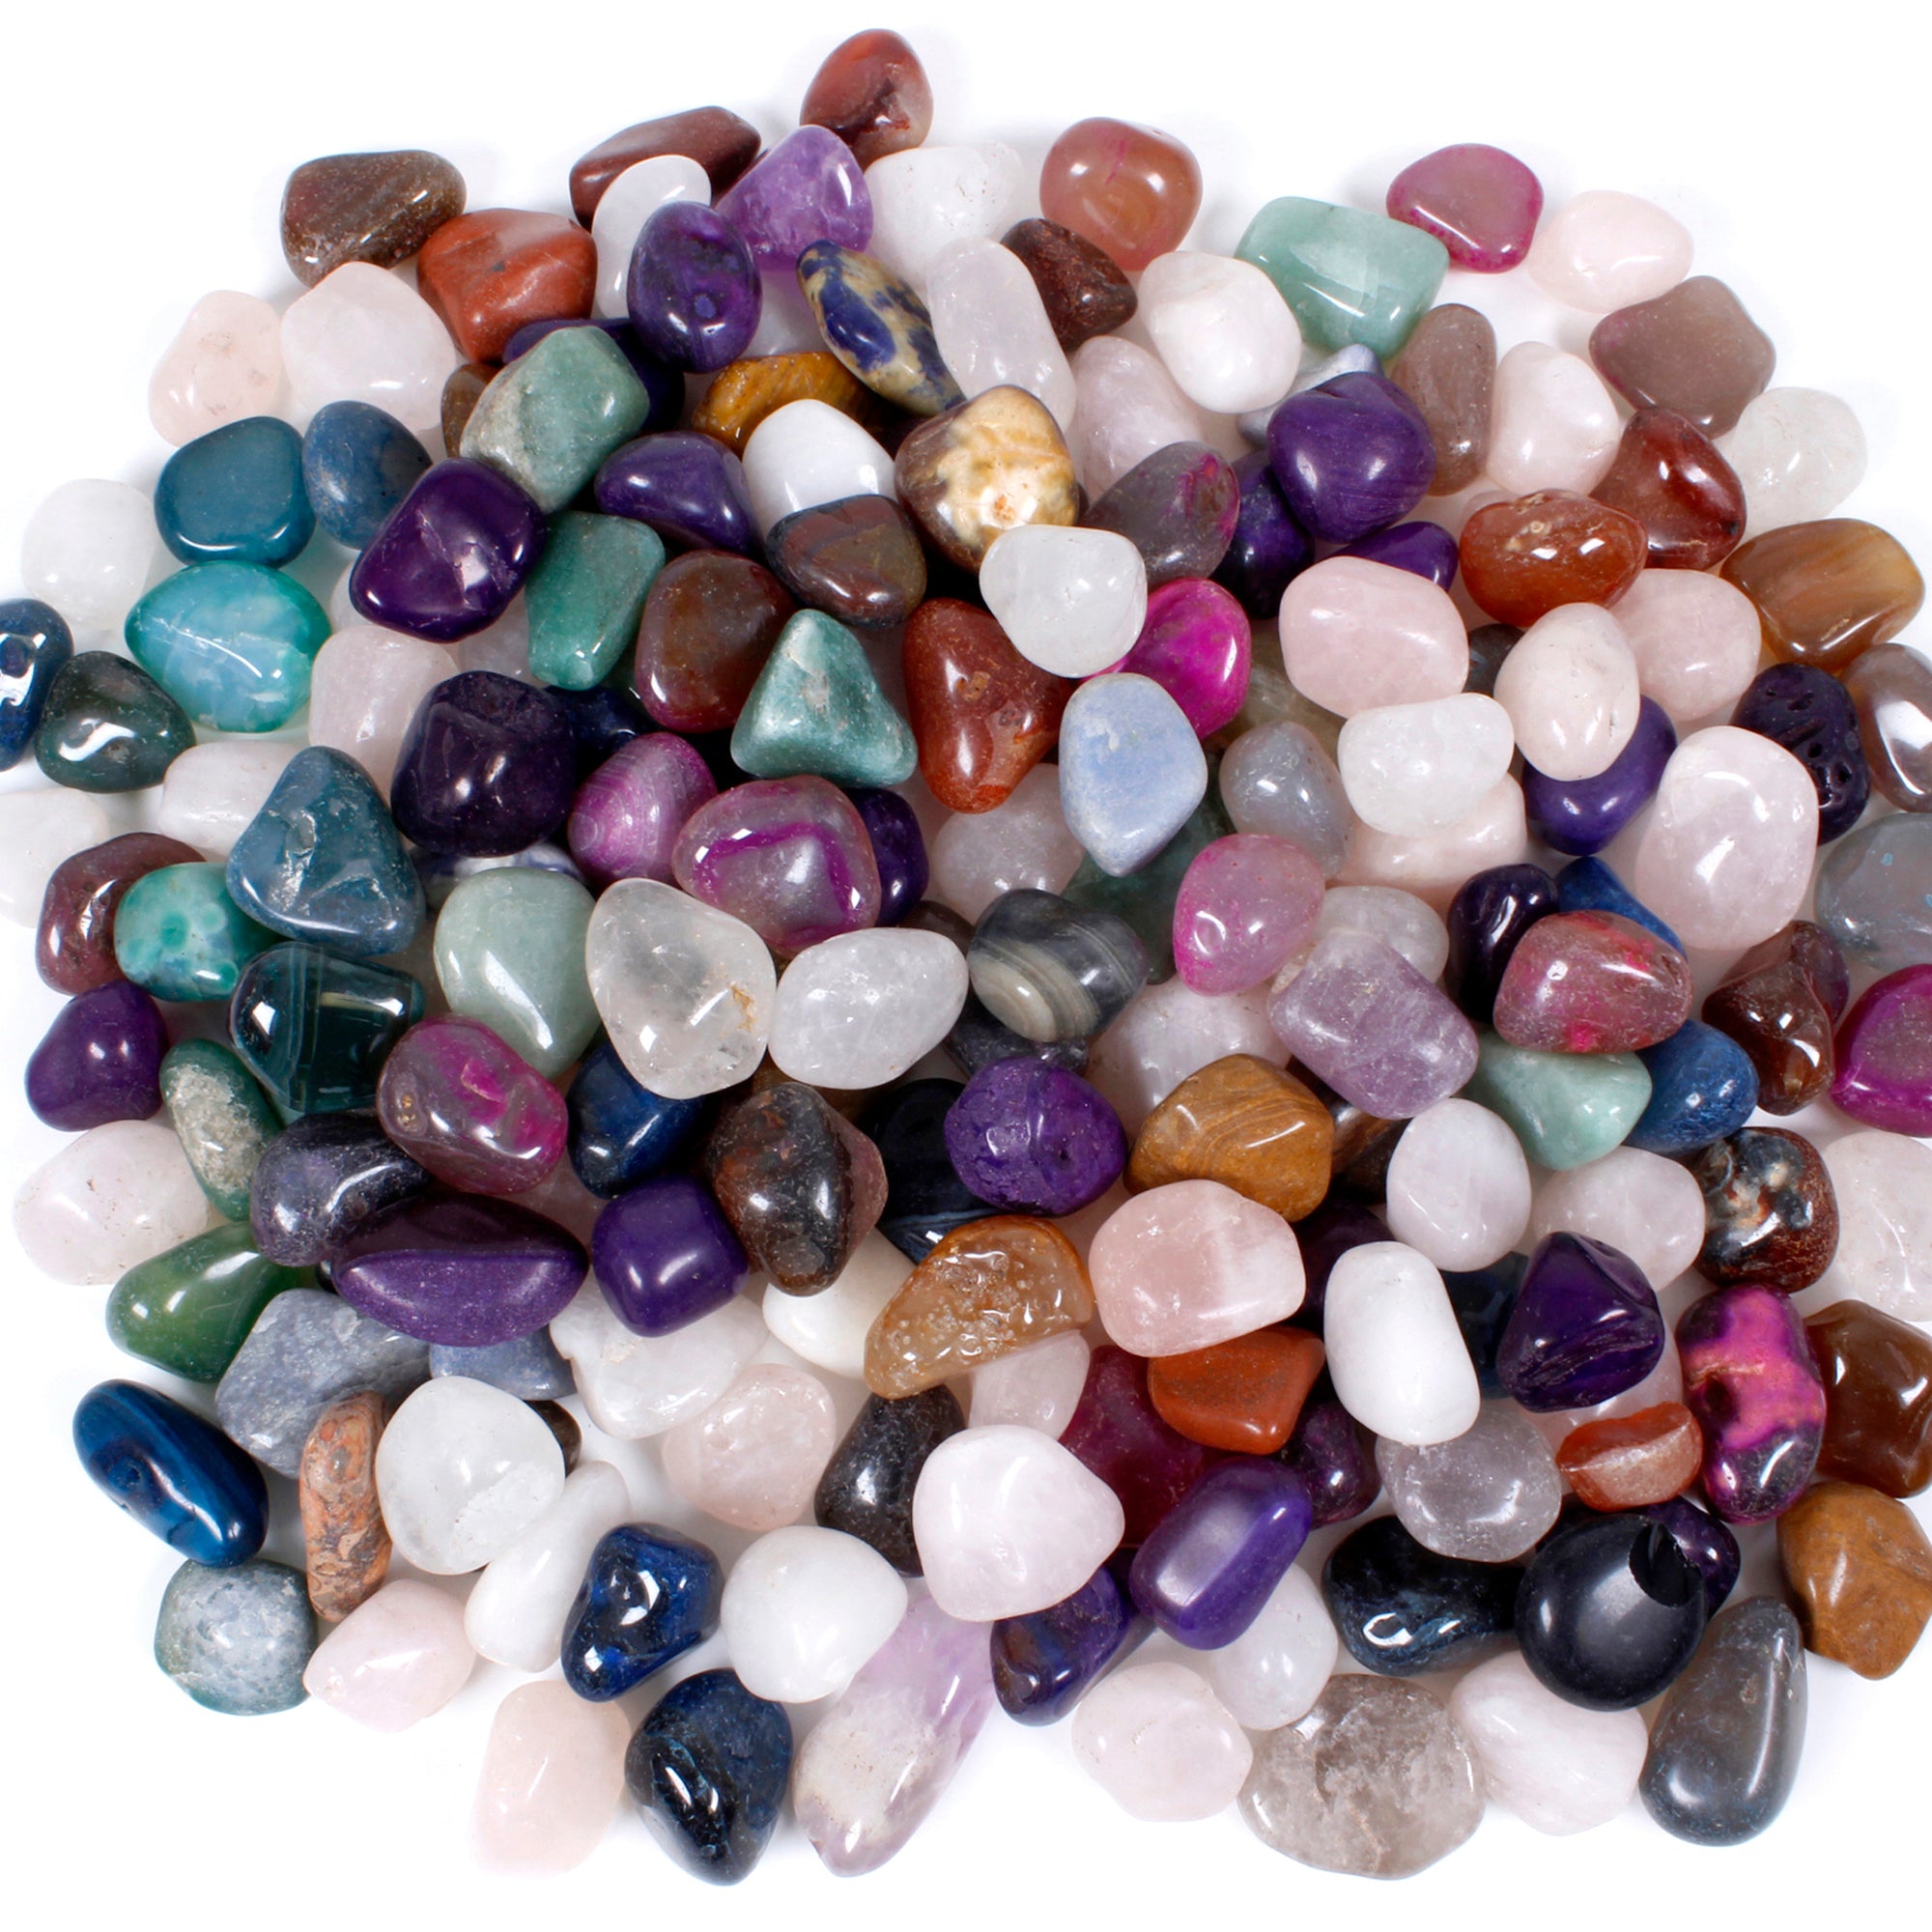 Tumbled Polished Natural and Dyed Gem Stones. Average Size 1 inch. Cho –  Dancing Bear's Rocks and Minerals